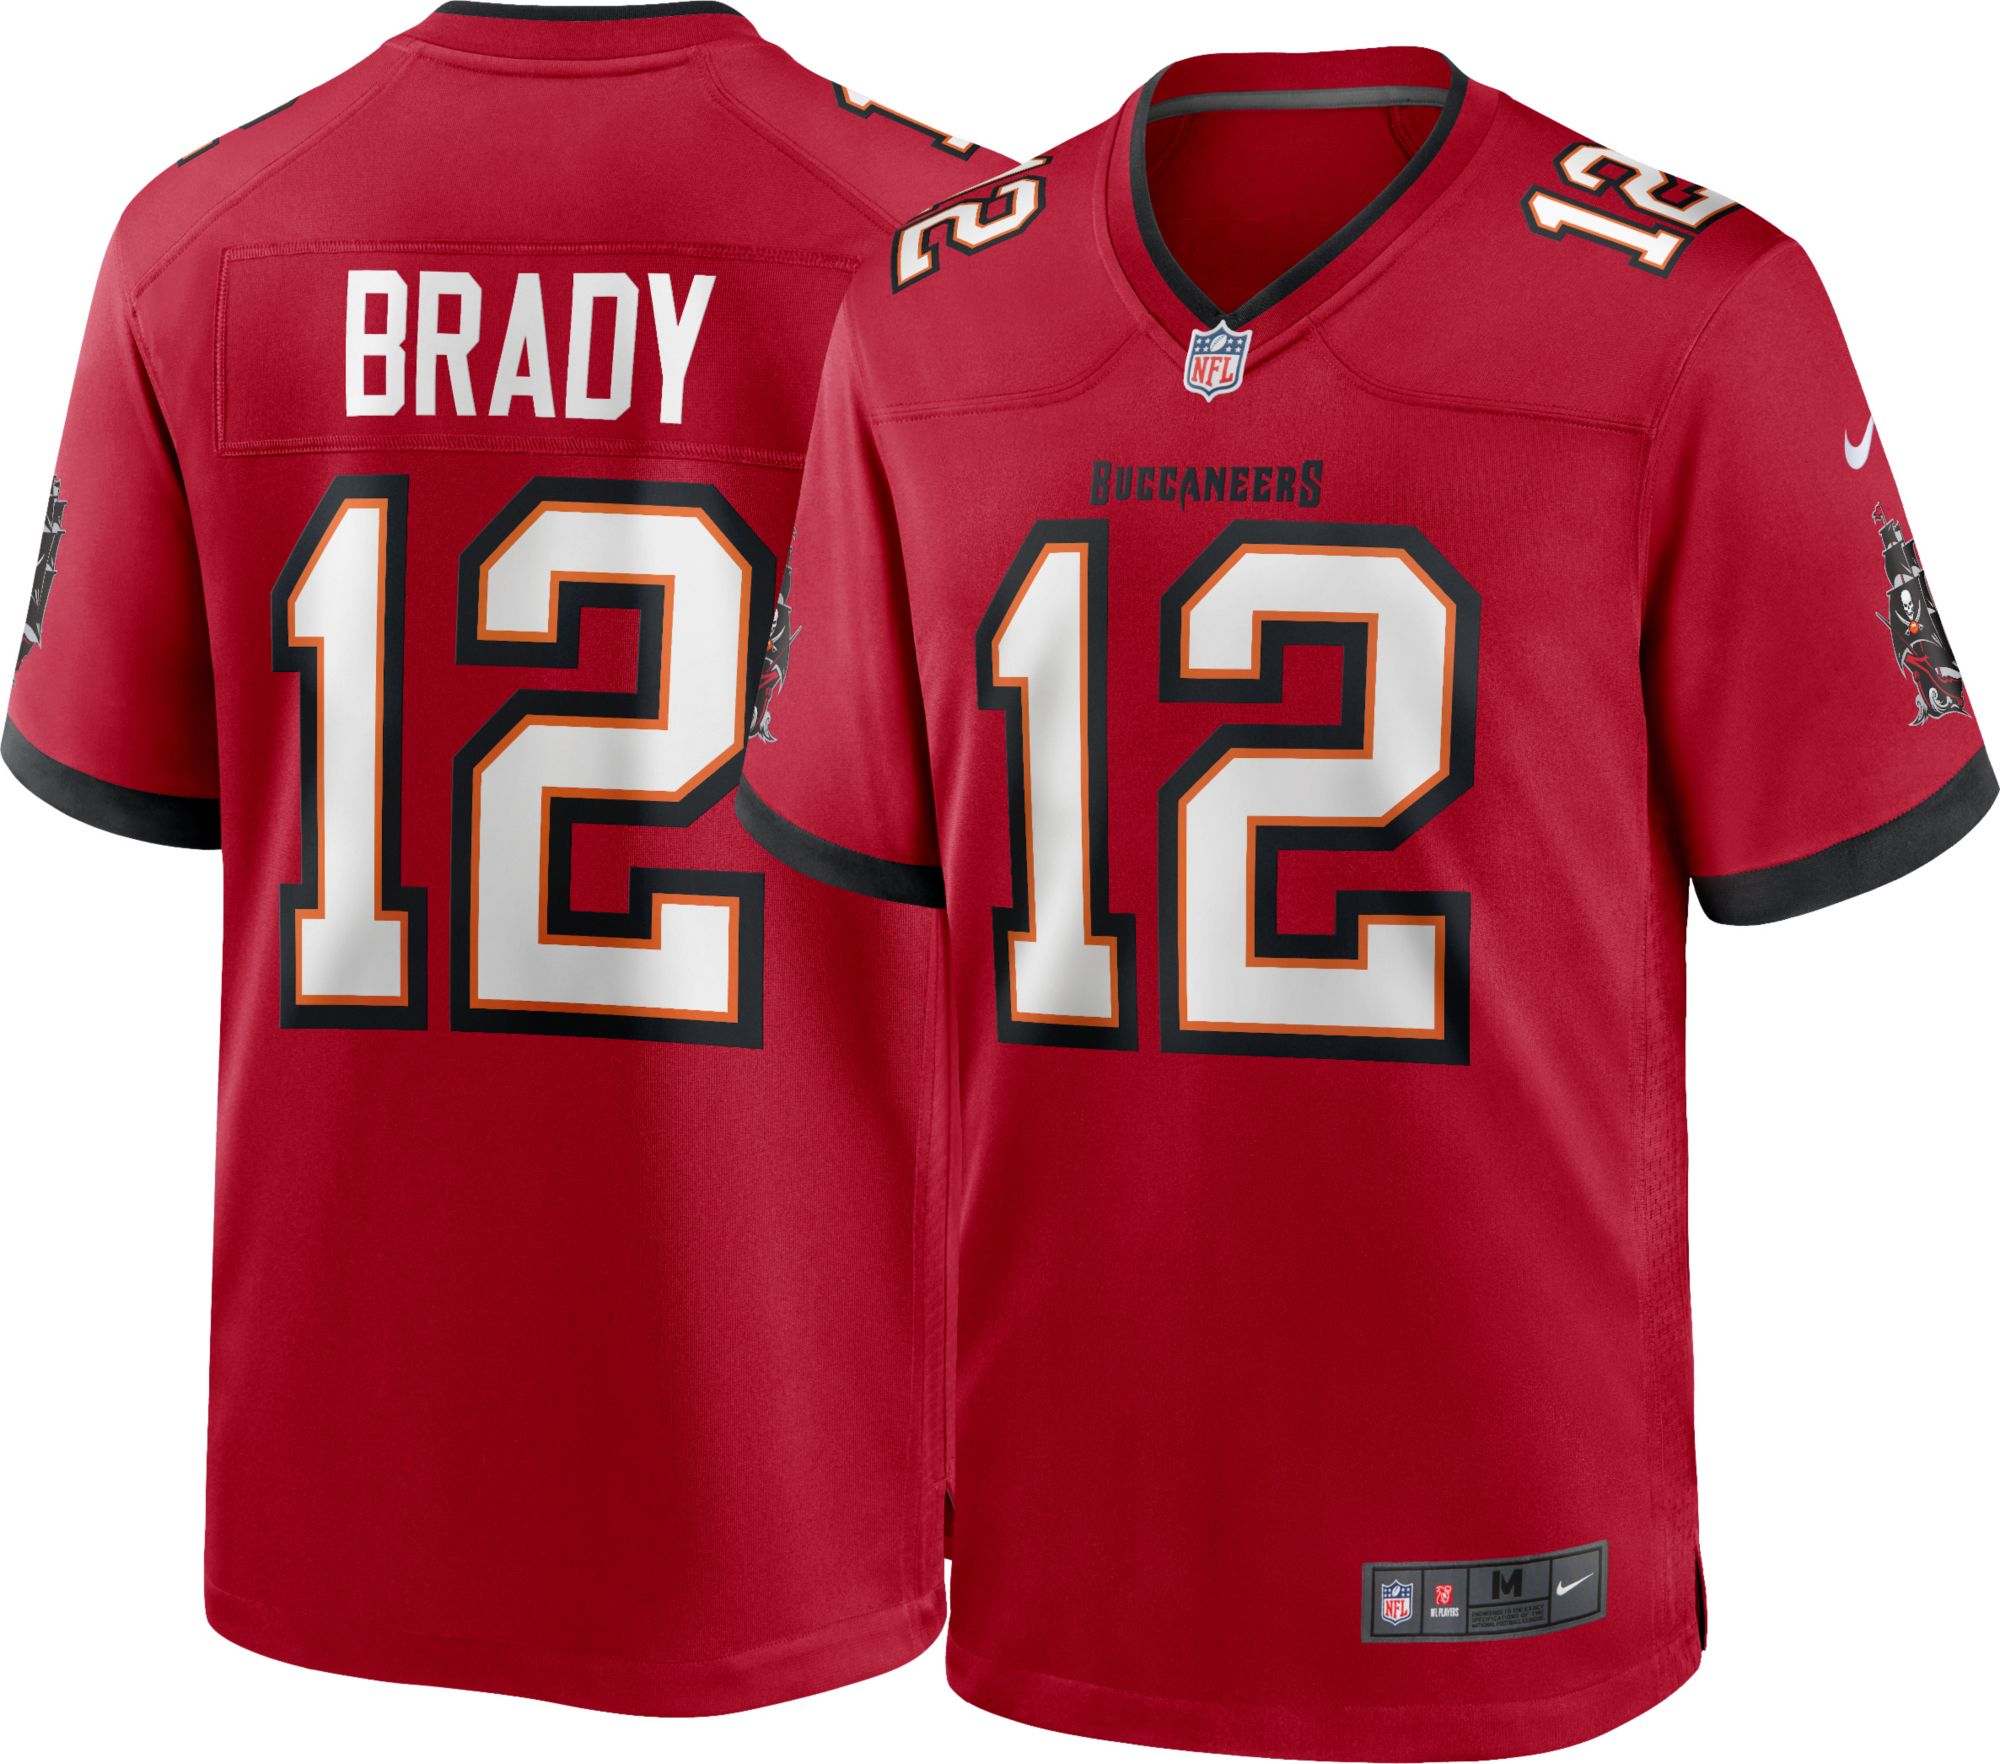 Nfl Attire Near Me Top Sellers, SAVE 52% 